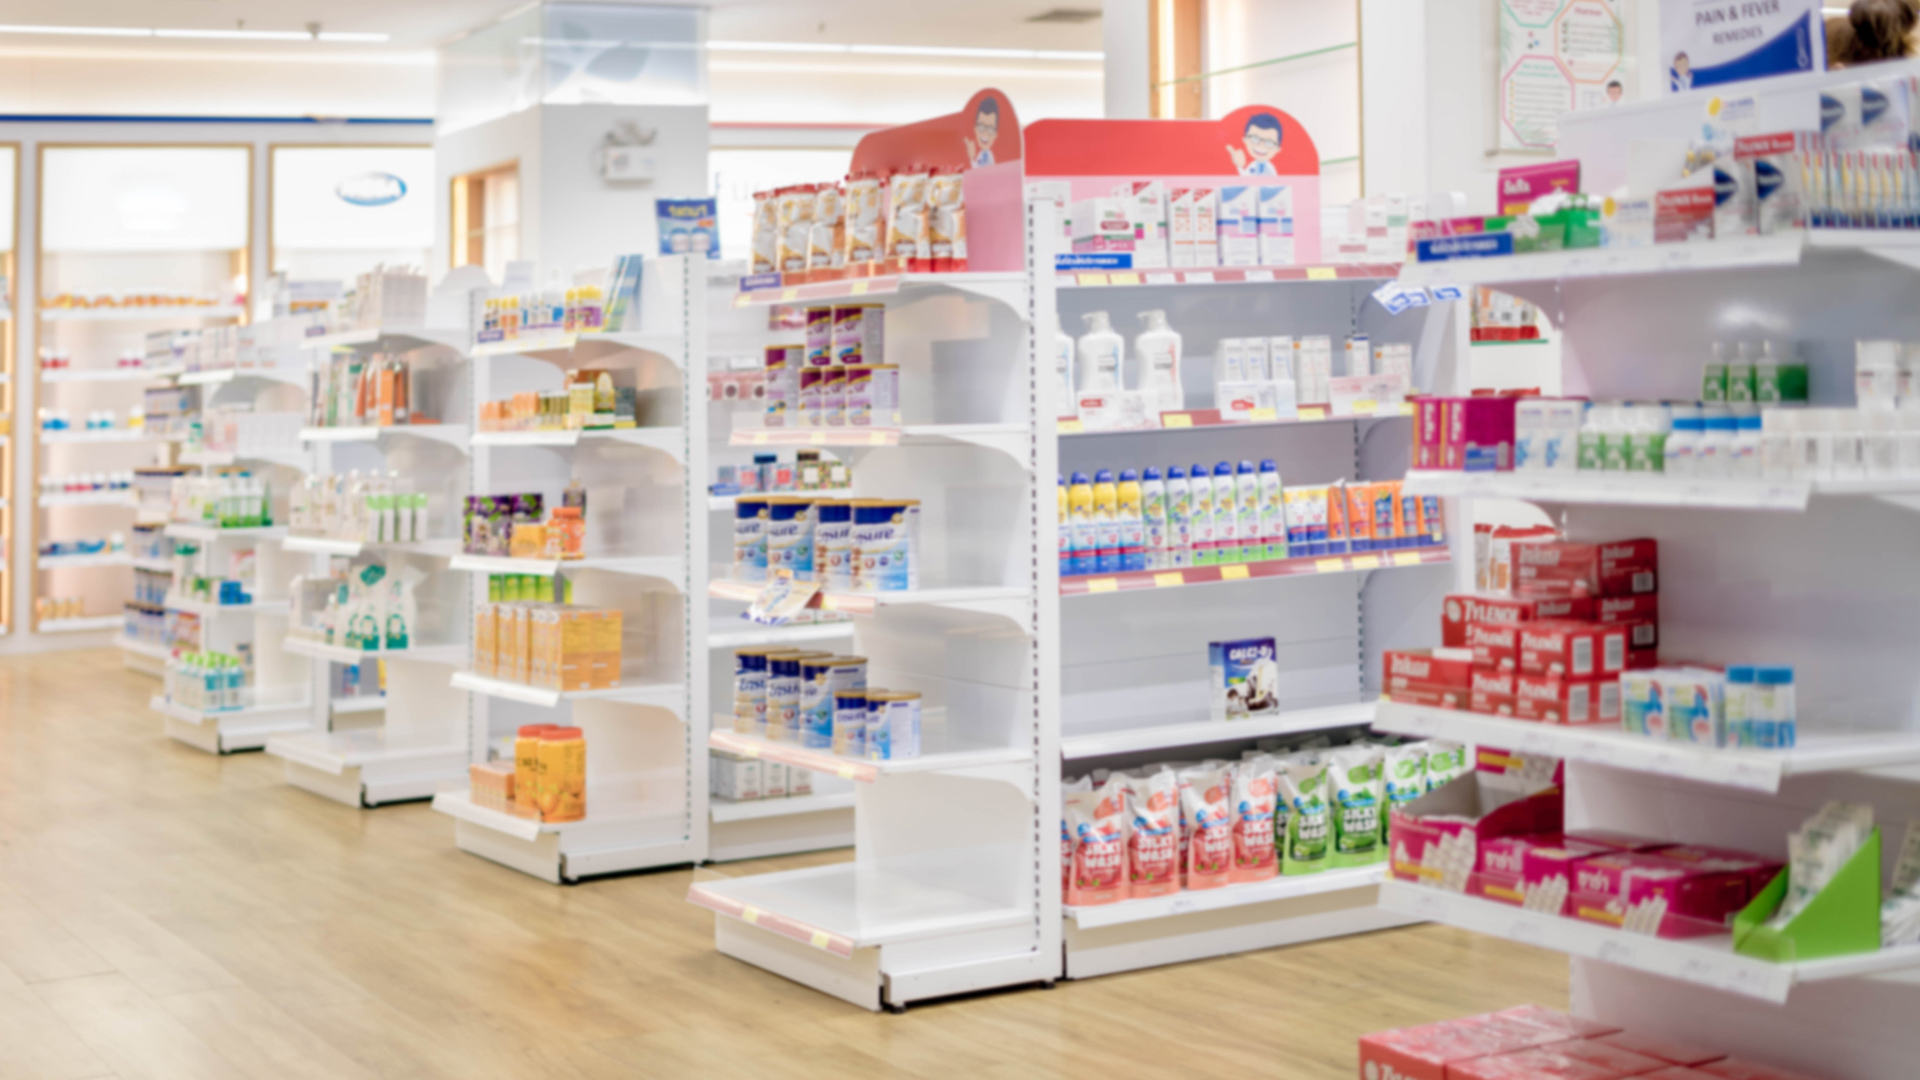 Retail and Health Merge as Consumers Seek a One-Stop Shop